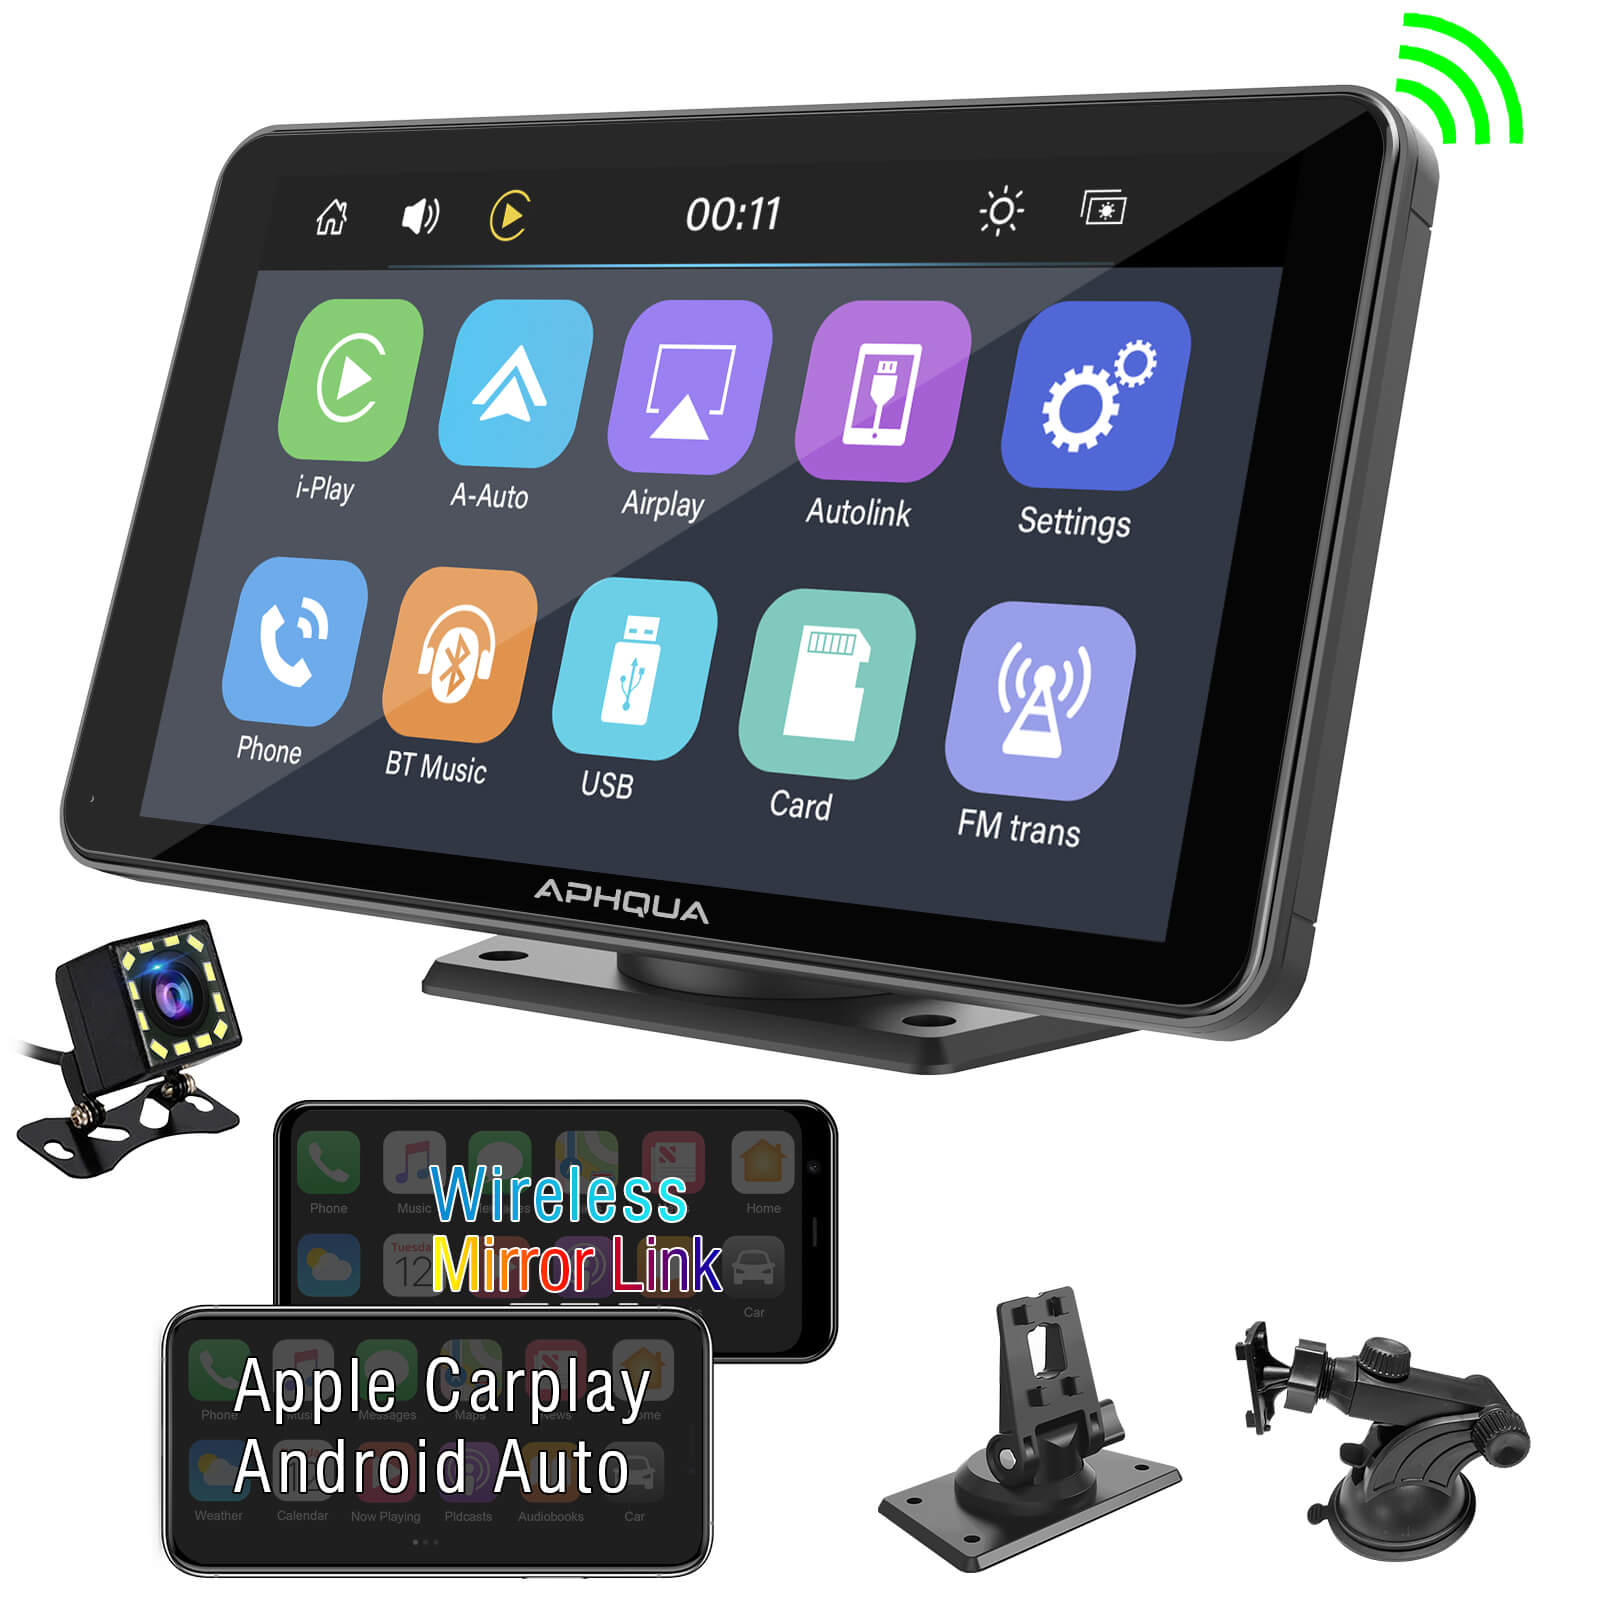 APHQUA Car Stereo with Wireless Apple Carplay and Android Auto, 7inch